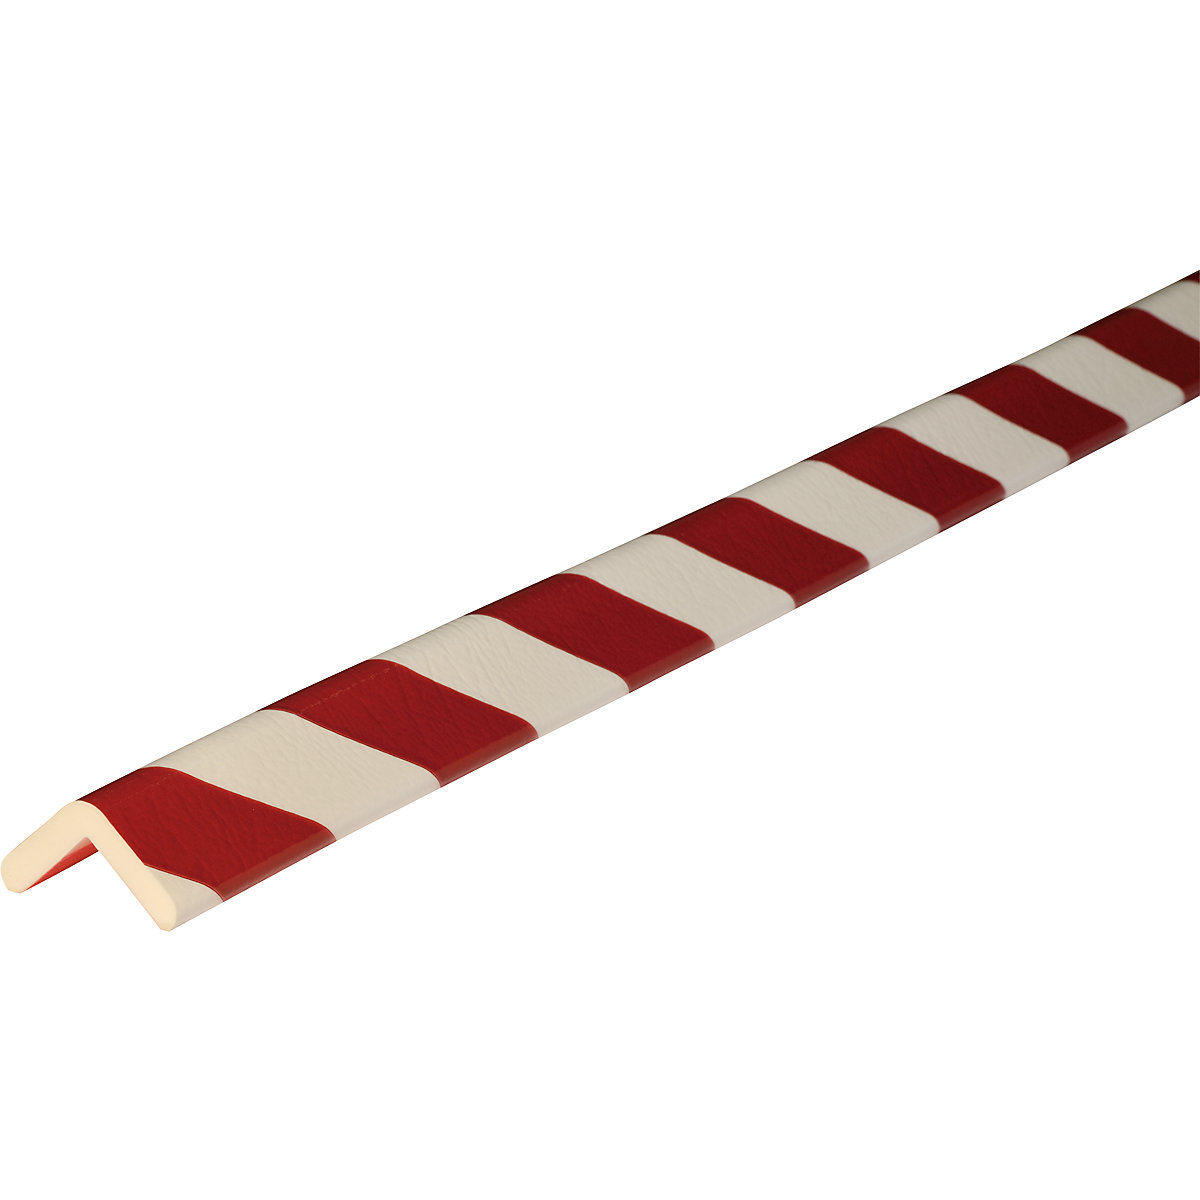 Knuffi® corner protection – SHG, type H, 1 x 5 m roll, red / white-15